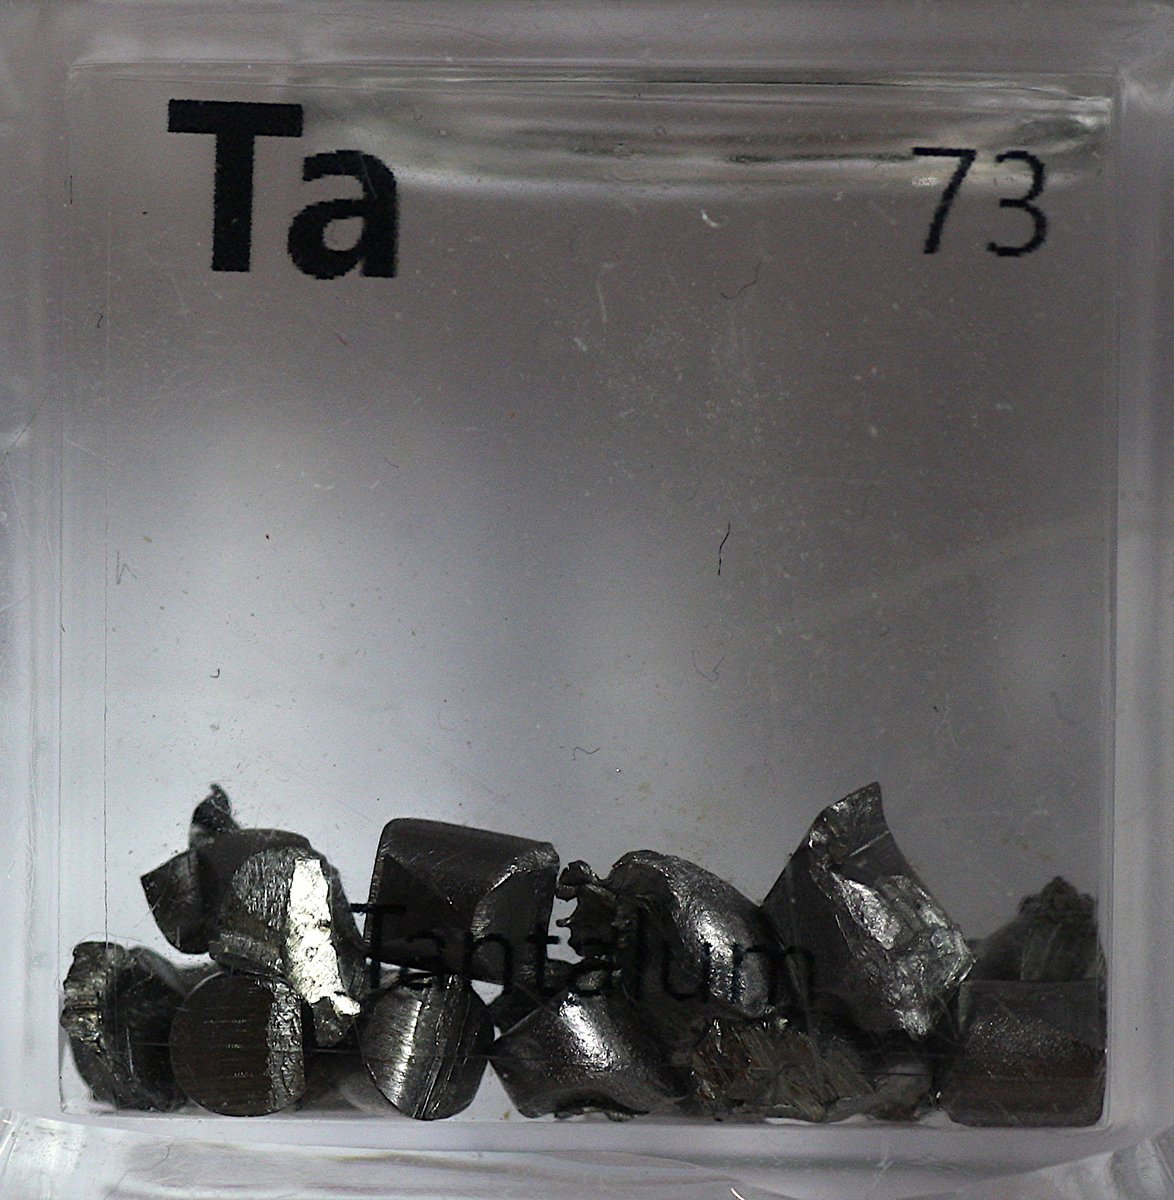 Tantalum  #elementphotos, with a pair of tantalum capacitors thrown in for good measure.